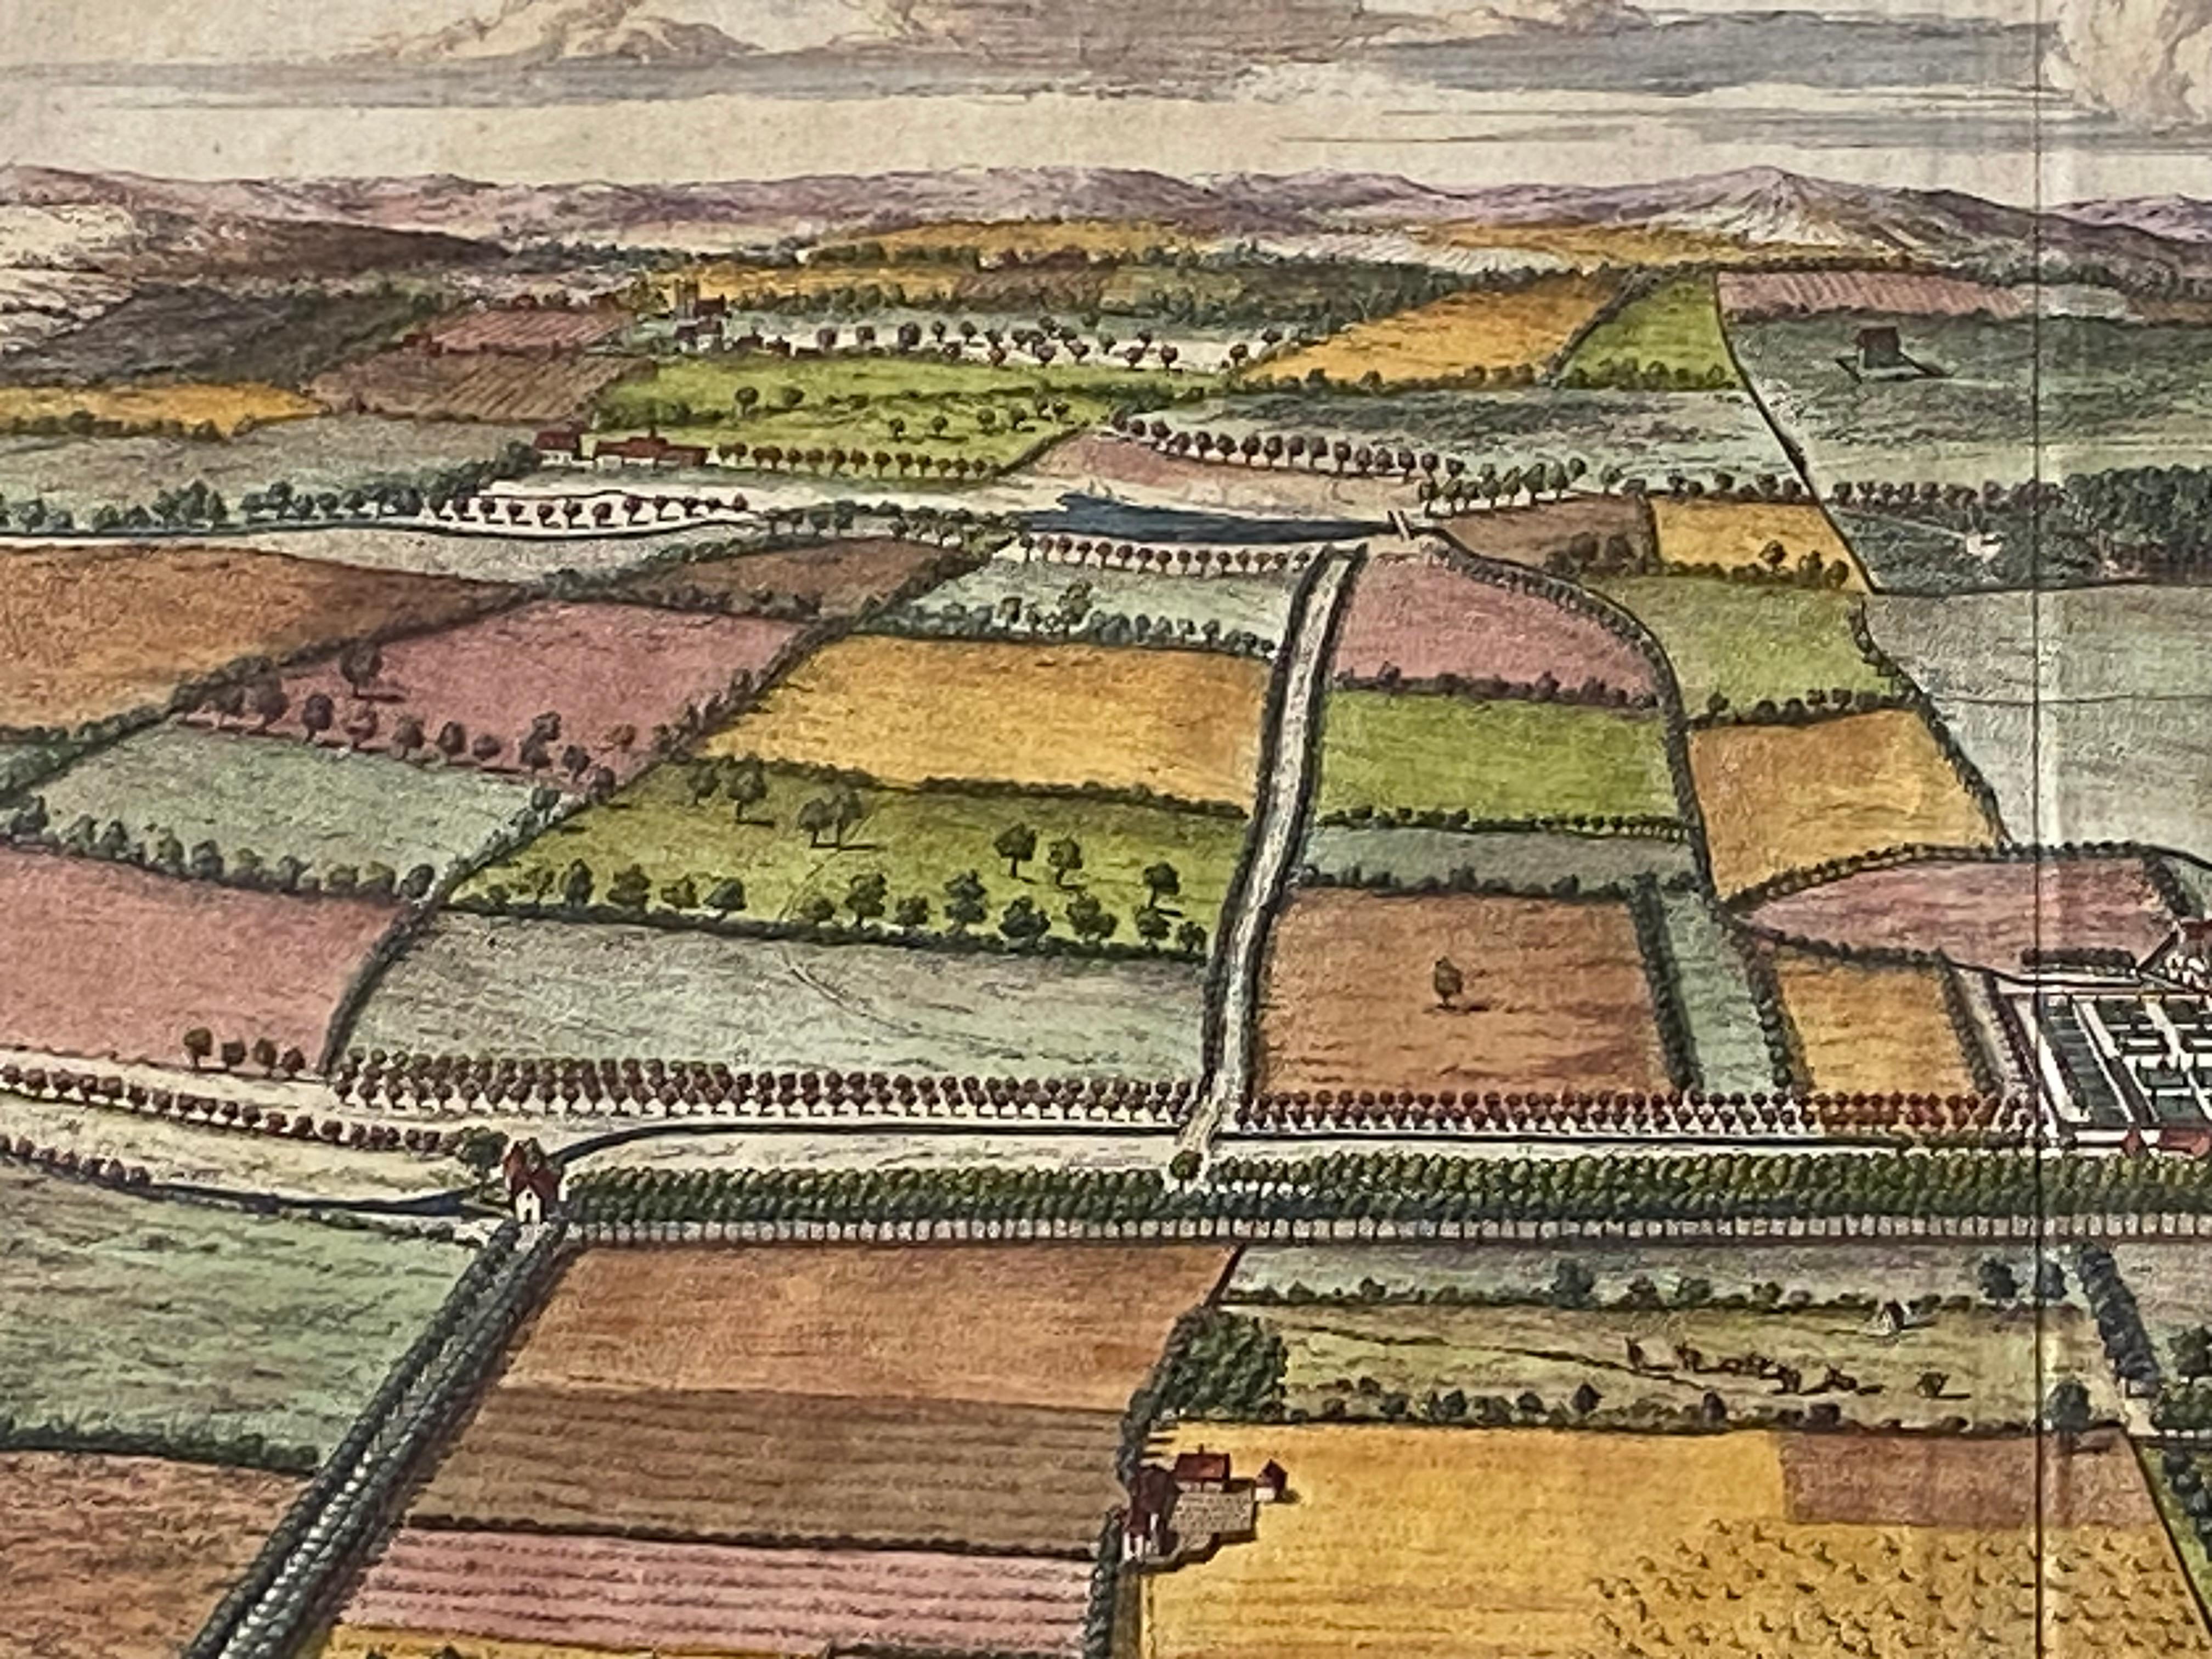 An original hand colored engraving by Johannes 'Jan' Kip (1653-1722) of Haughton in the County of Nottinghamshire, one of the seats of Prince John Duke of Newcastle, after the drawing by L. Knyff for 'Britannia Illustrata or Views of Several of the